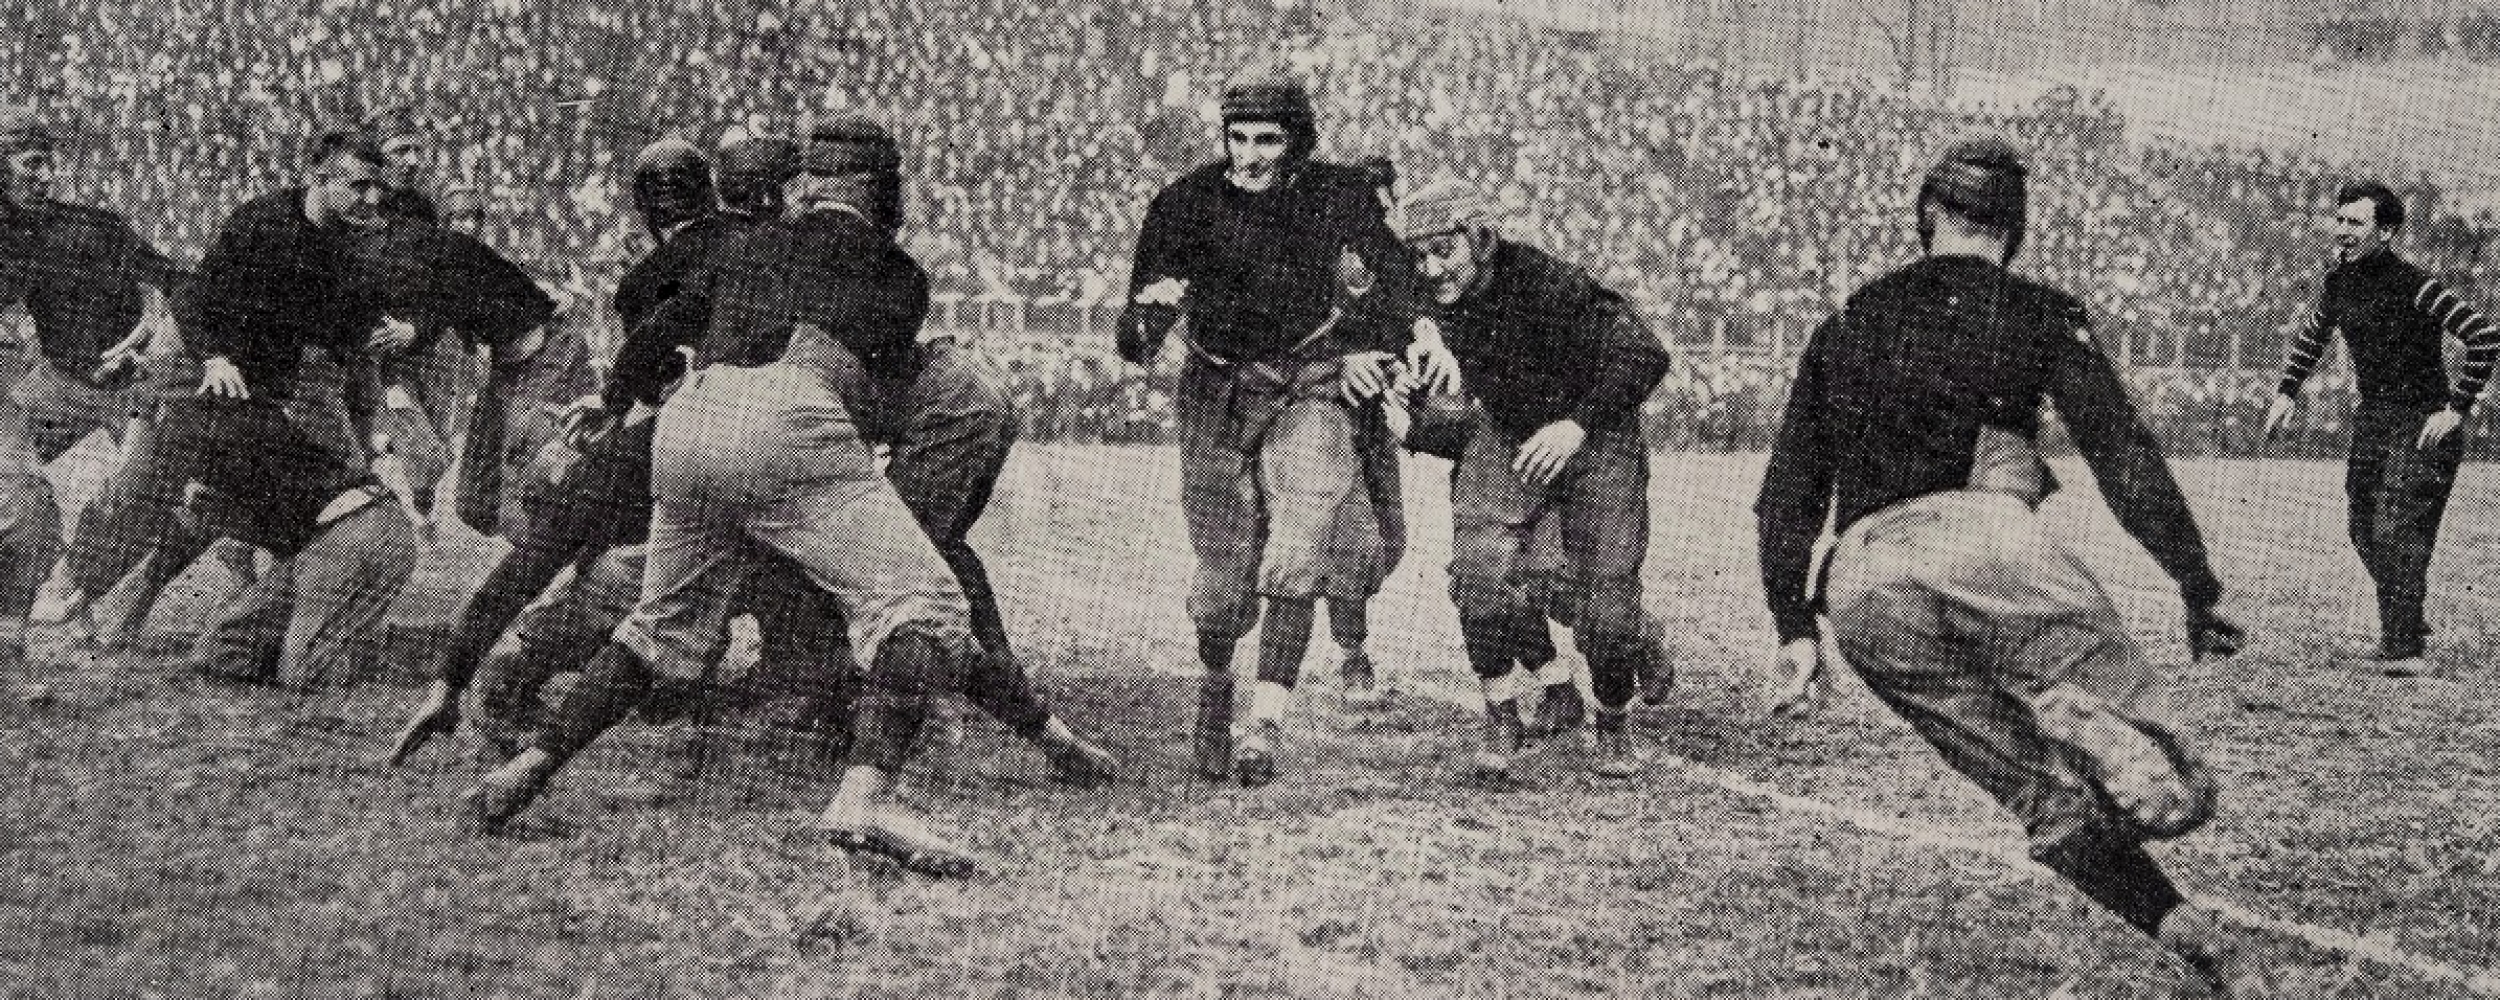   Leonard Teddy Baehr carries the ball at UC on Oct. 31, 1914.